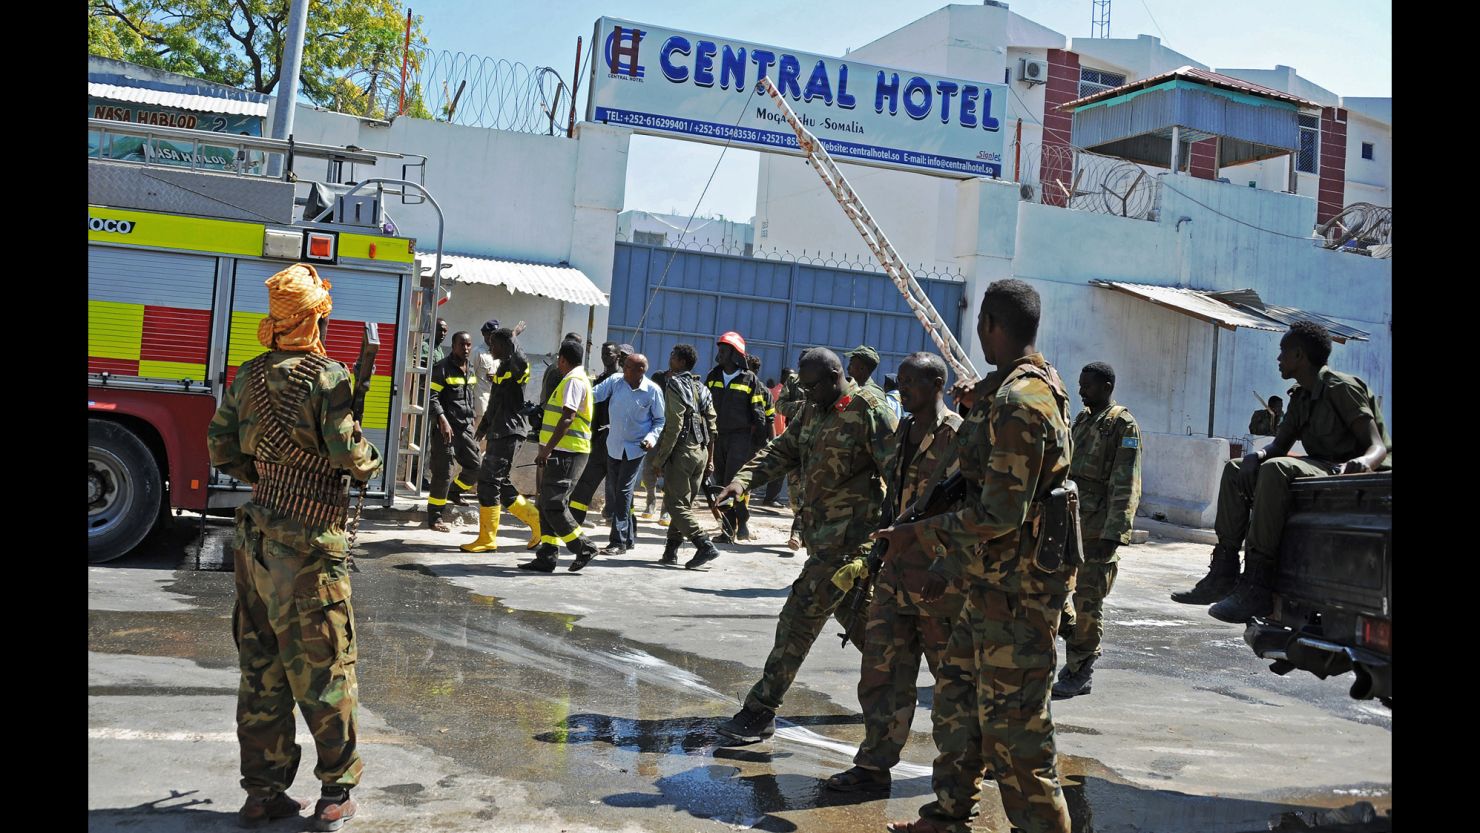 Somali security forces, medics and firefighters stand outside Mogadishu's Central Hotel after Friday's attack.